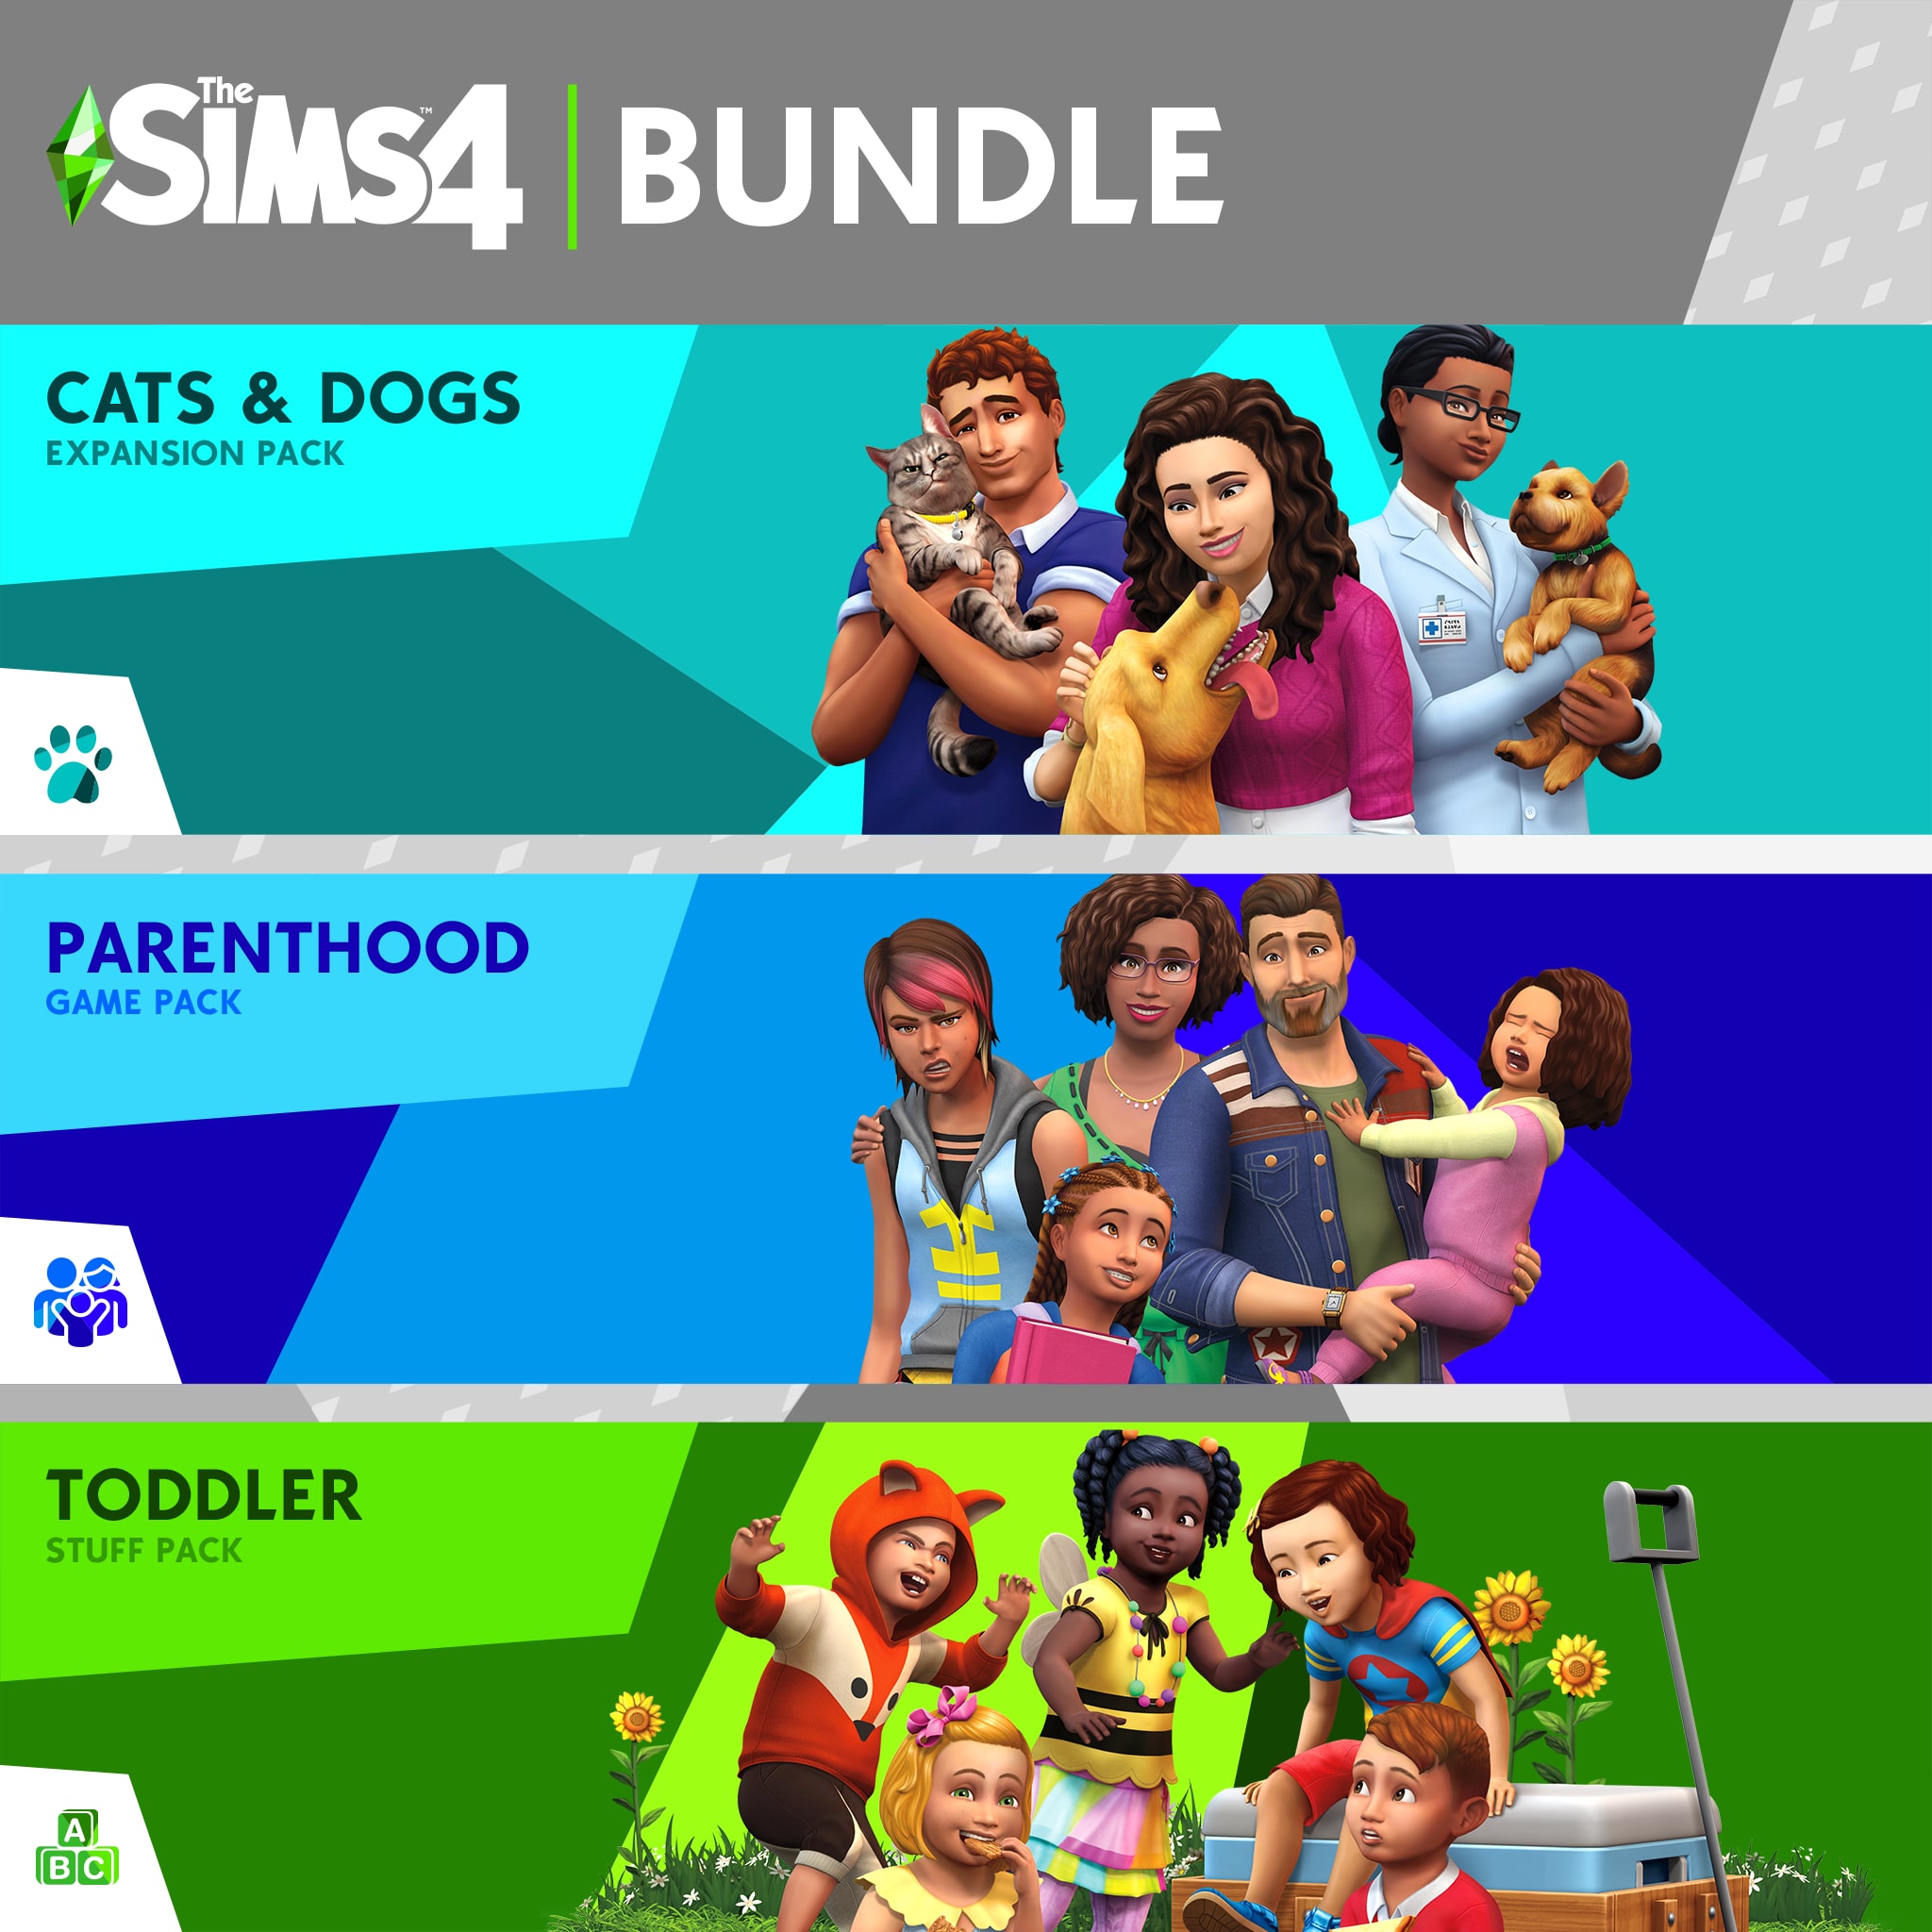 sims 4 ps4 cost